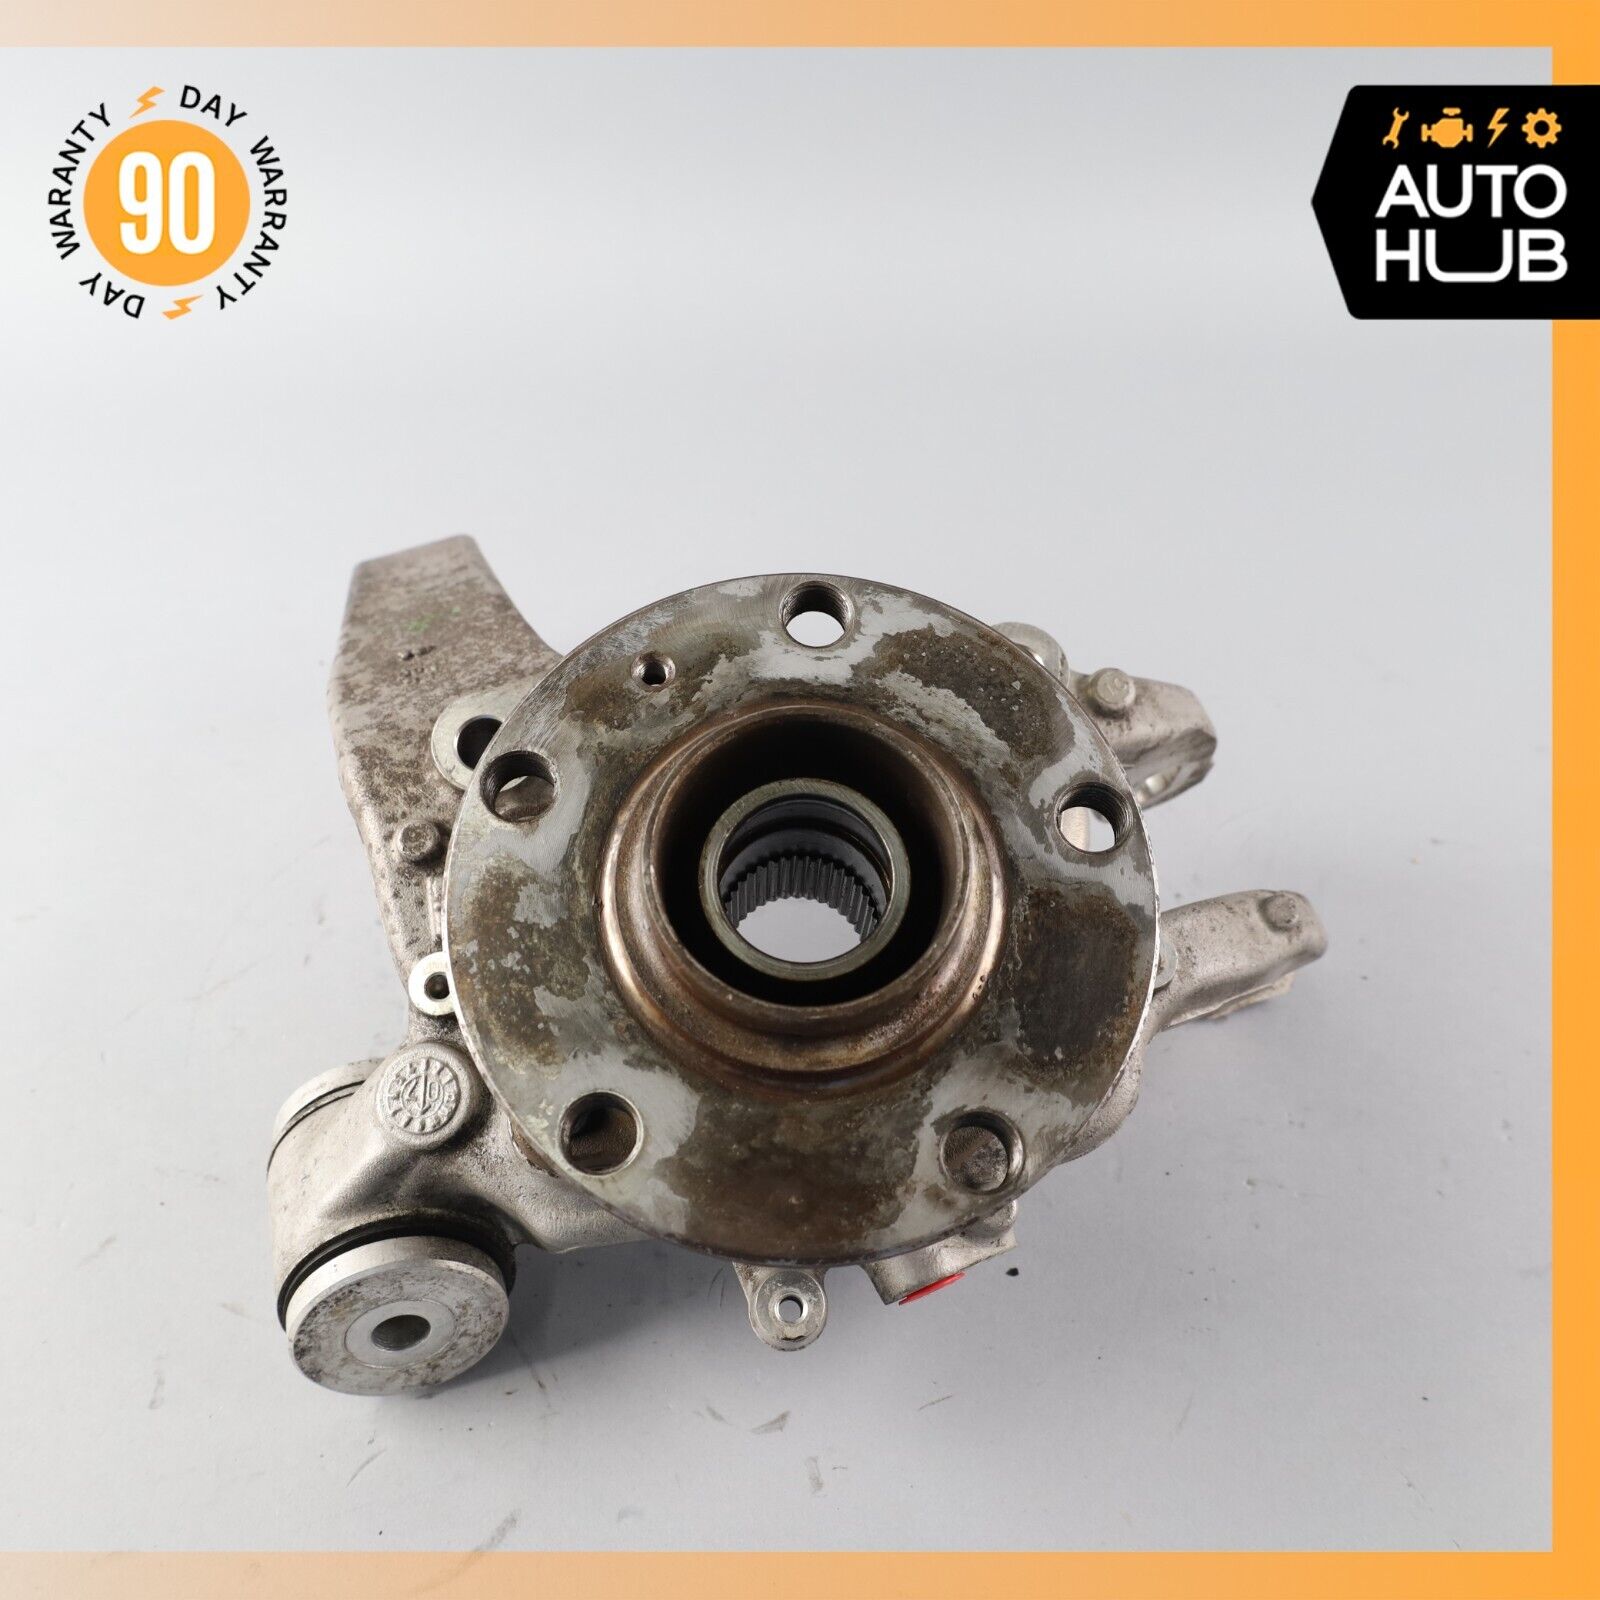 07-11 Bentley Continental GTC Rear Right Side Spindle Knuckle Hub OEM 63k